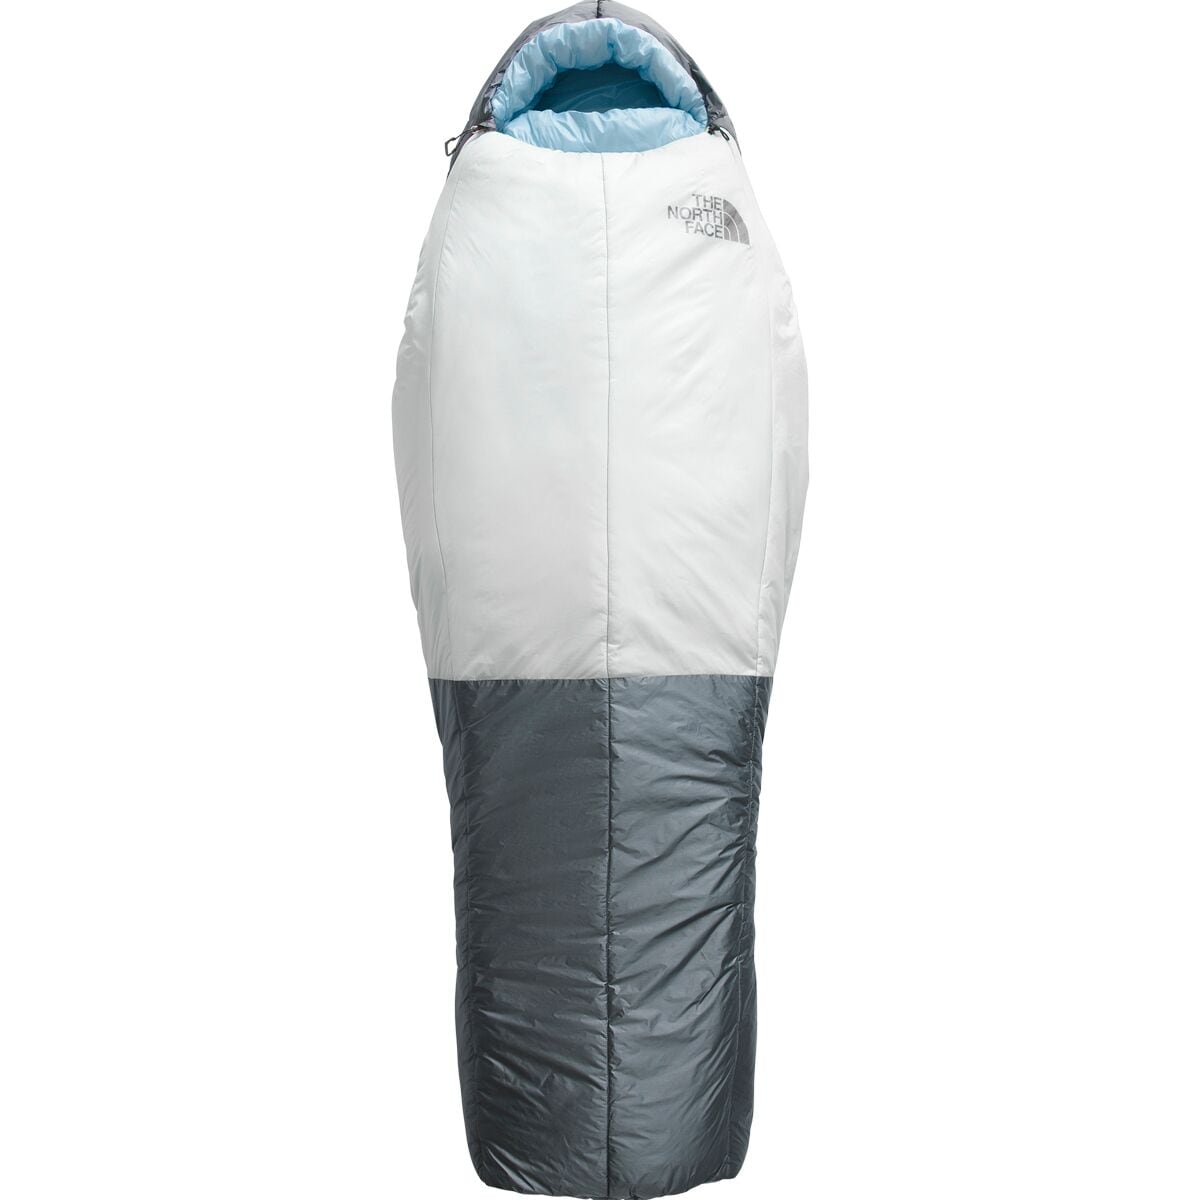 The North Face Cat's Meow Sleeping Bag: 20F Synthetic - Women's